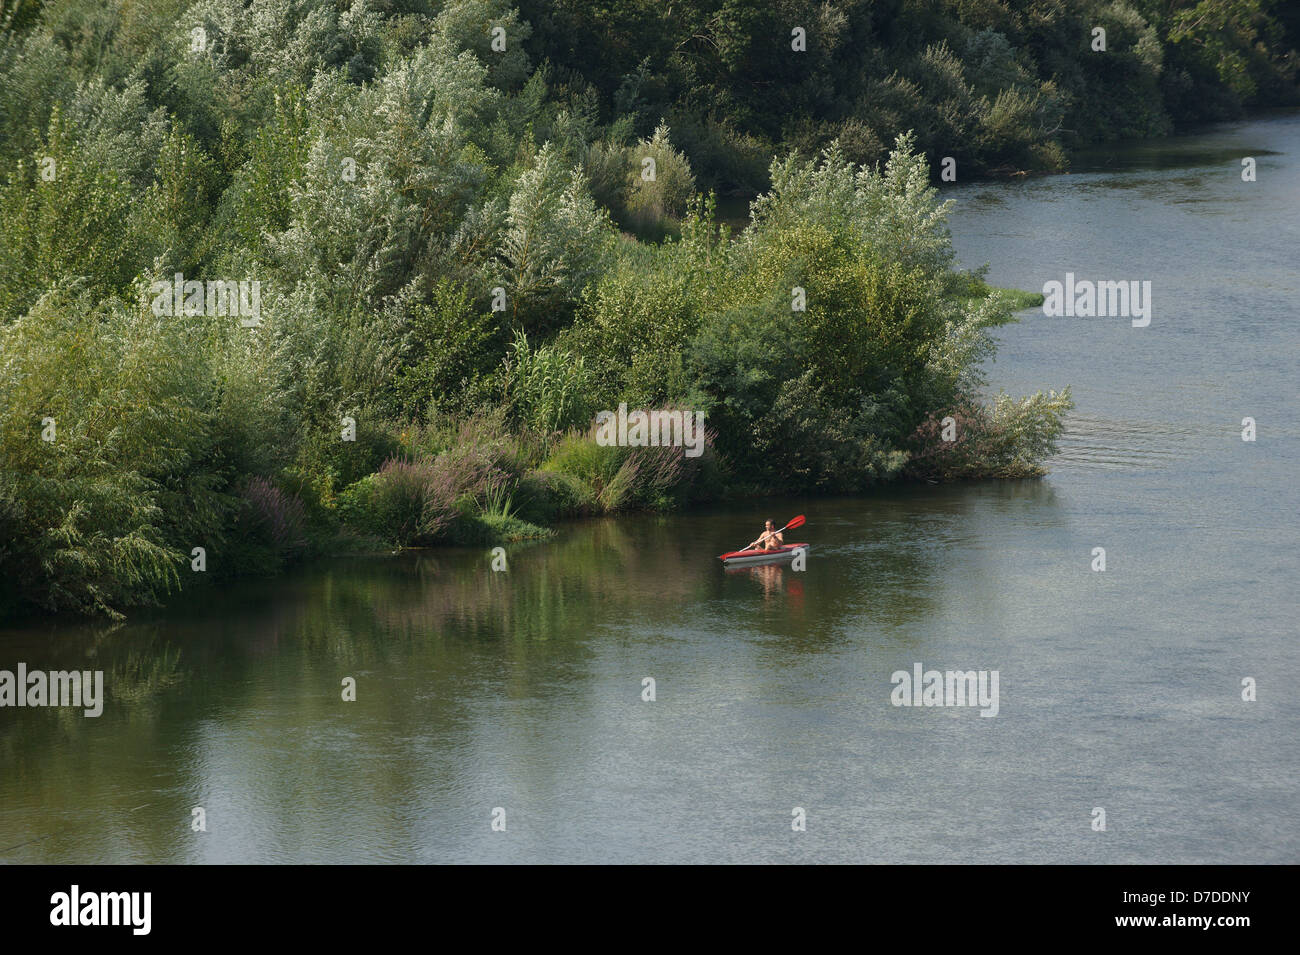 Kayaker on a river Stock Photo